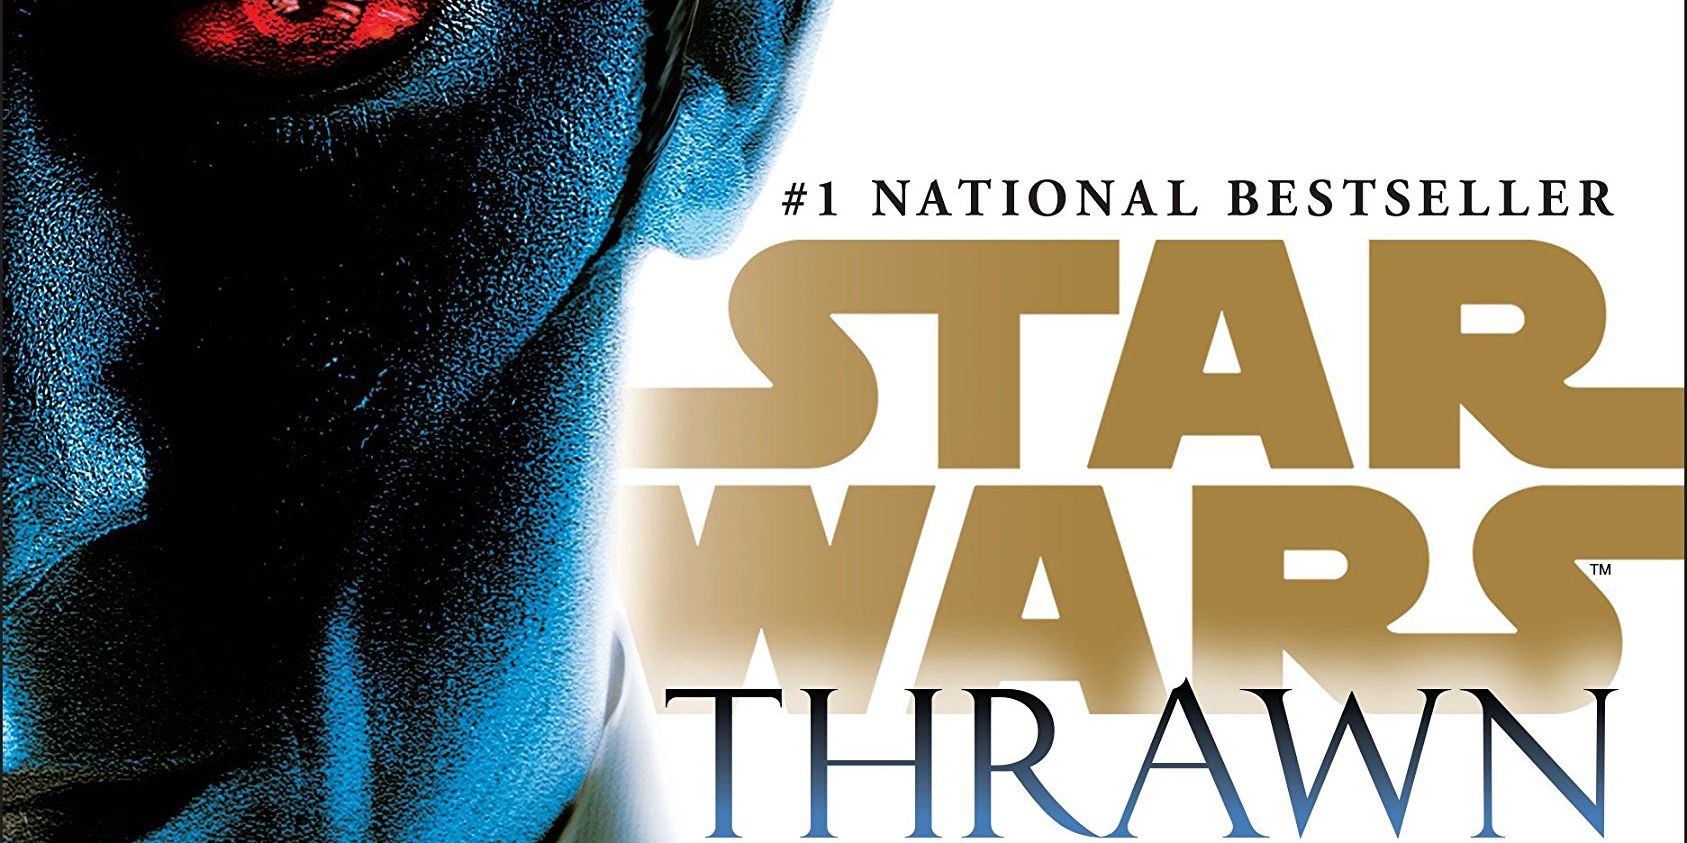 The Cover of Star Wars: Thrawn featuring the blue face of the Chiss military leader